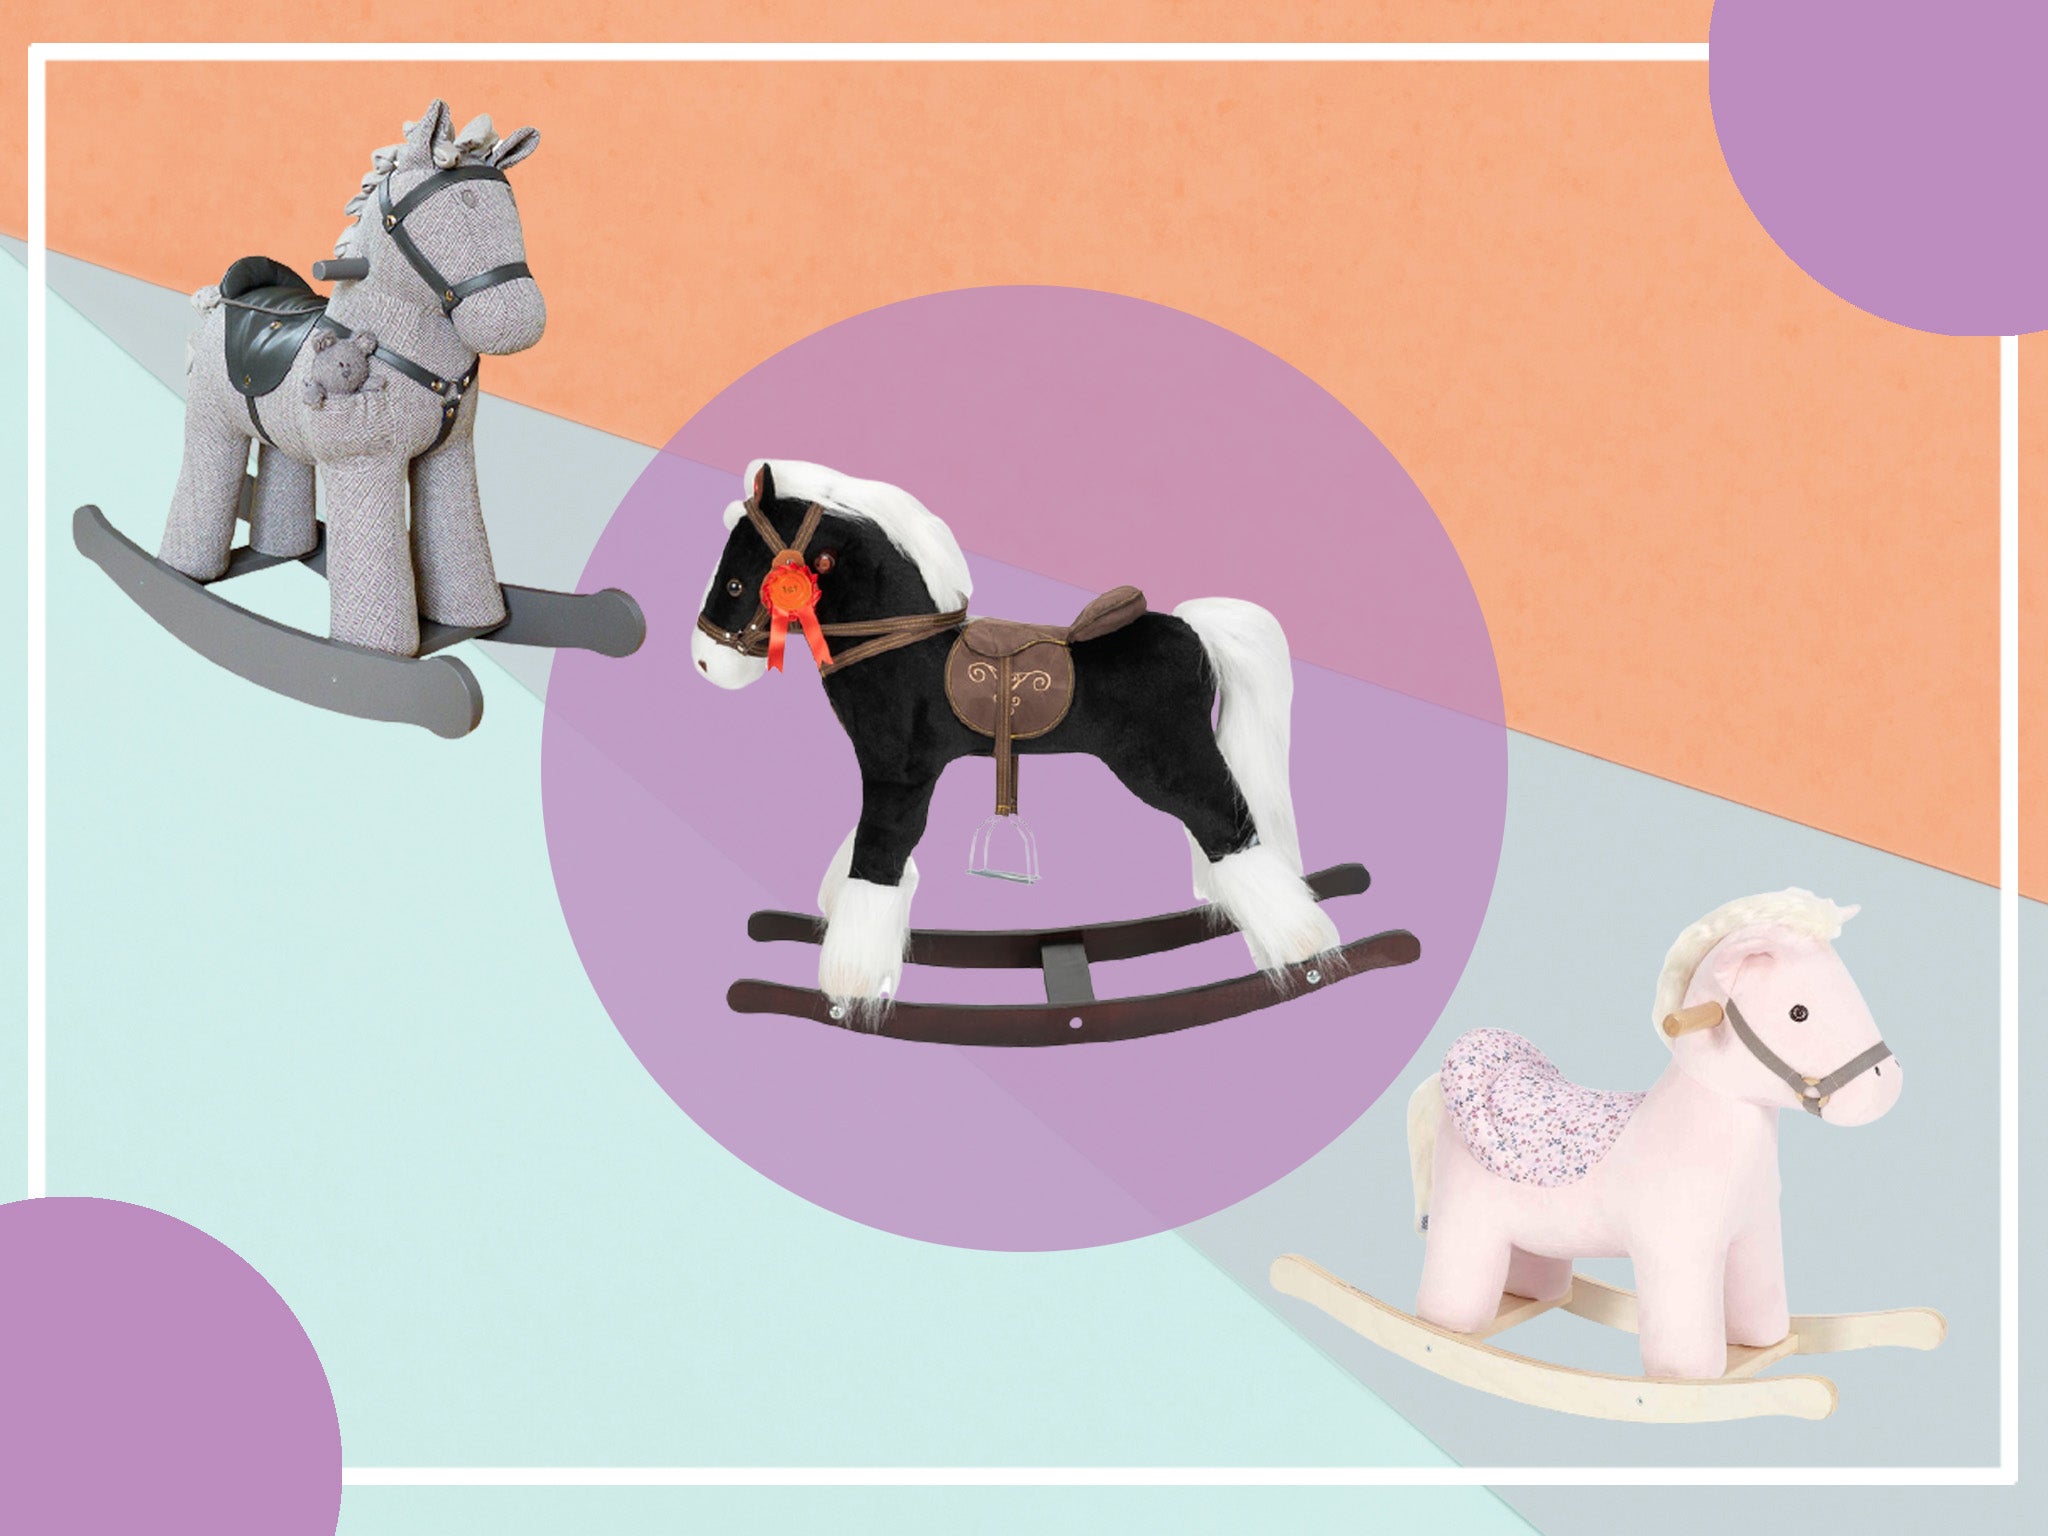 Rocking horses are great for developing balance, coordination, gross motor skills and sparking children’s imaginations